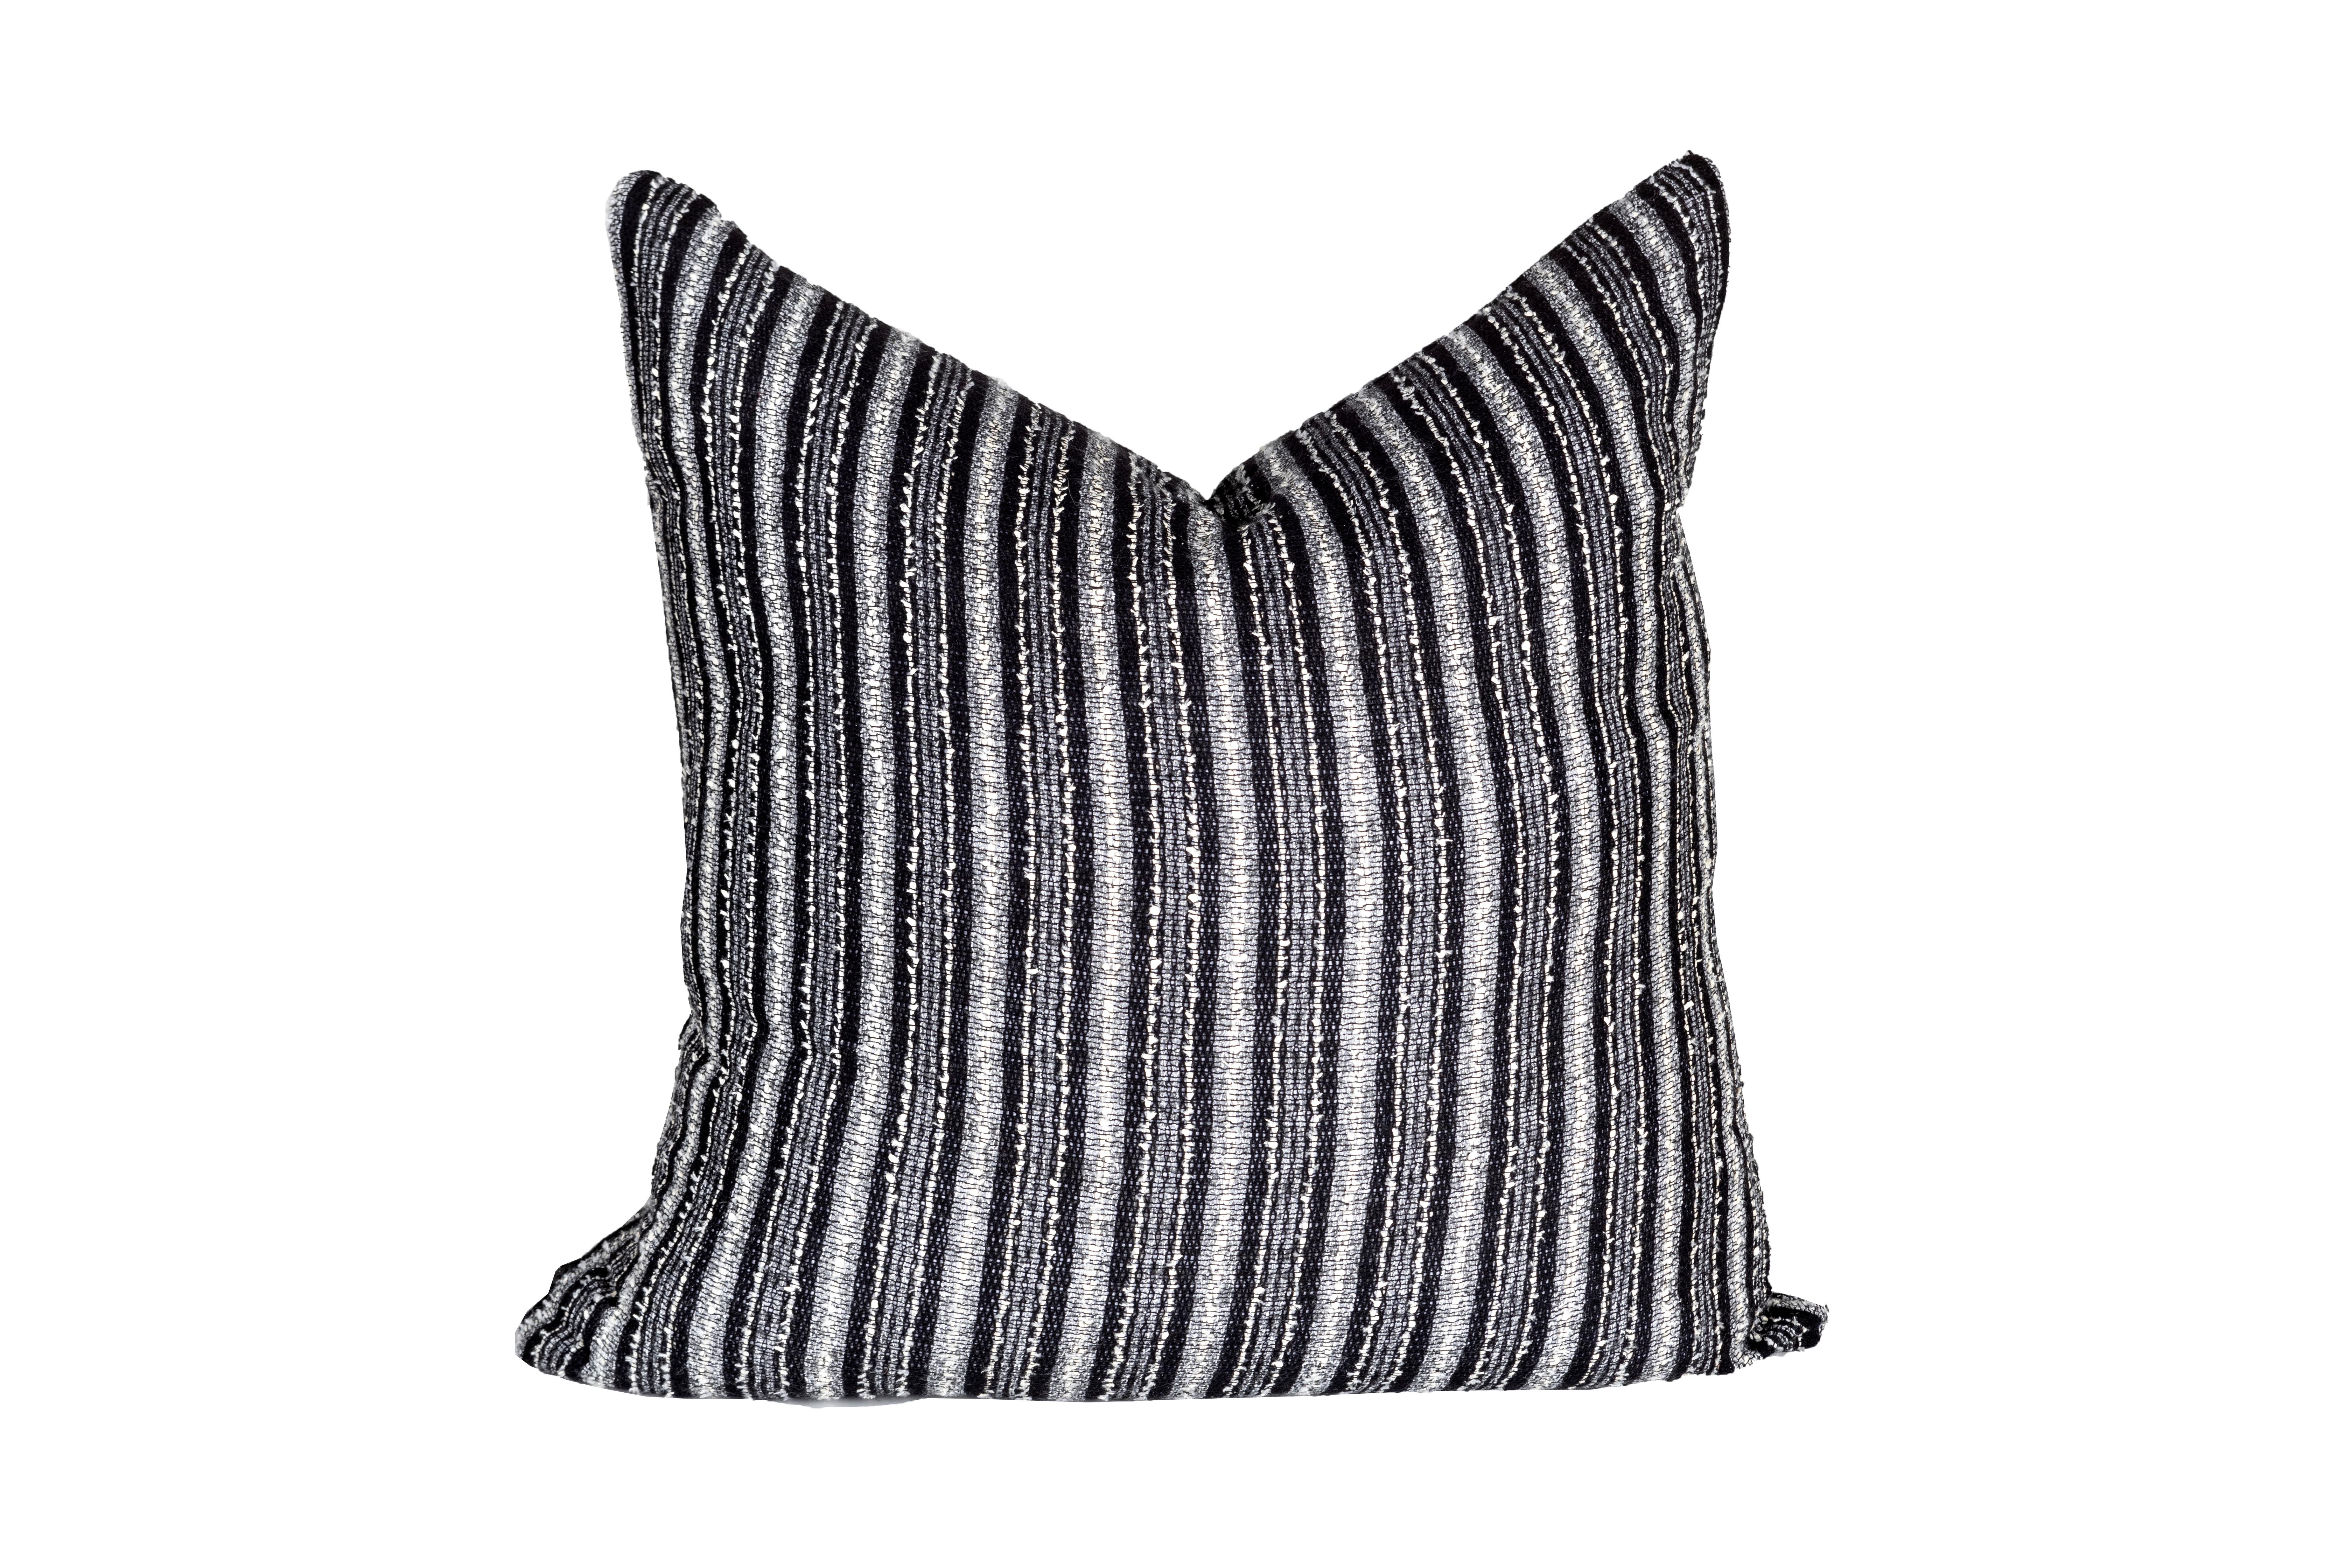 This beautiful pillow is composed of vintage Italia boucle. The black and white contrast is striking, while the quality craftsmanship provides a softness that will be hard to resist. This down filled pillow is stuffed with high-quality down feathers